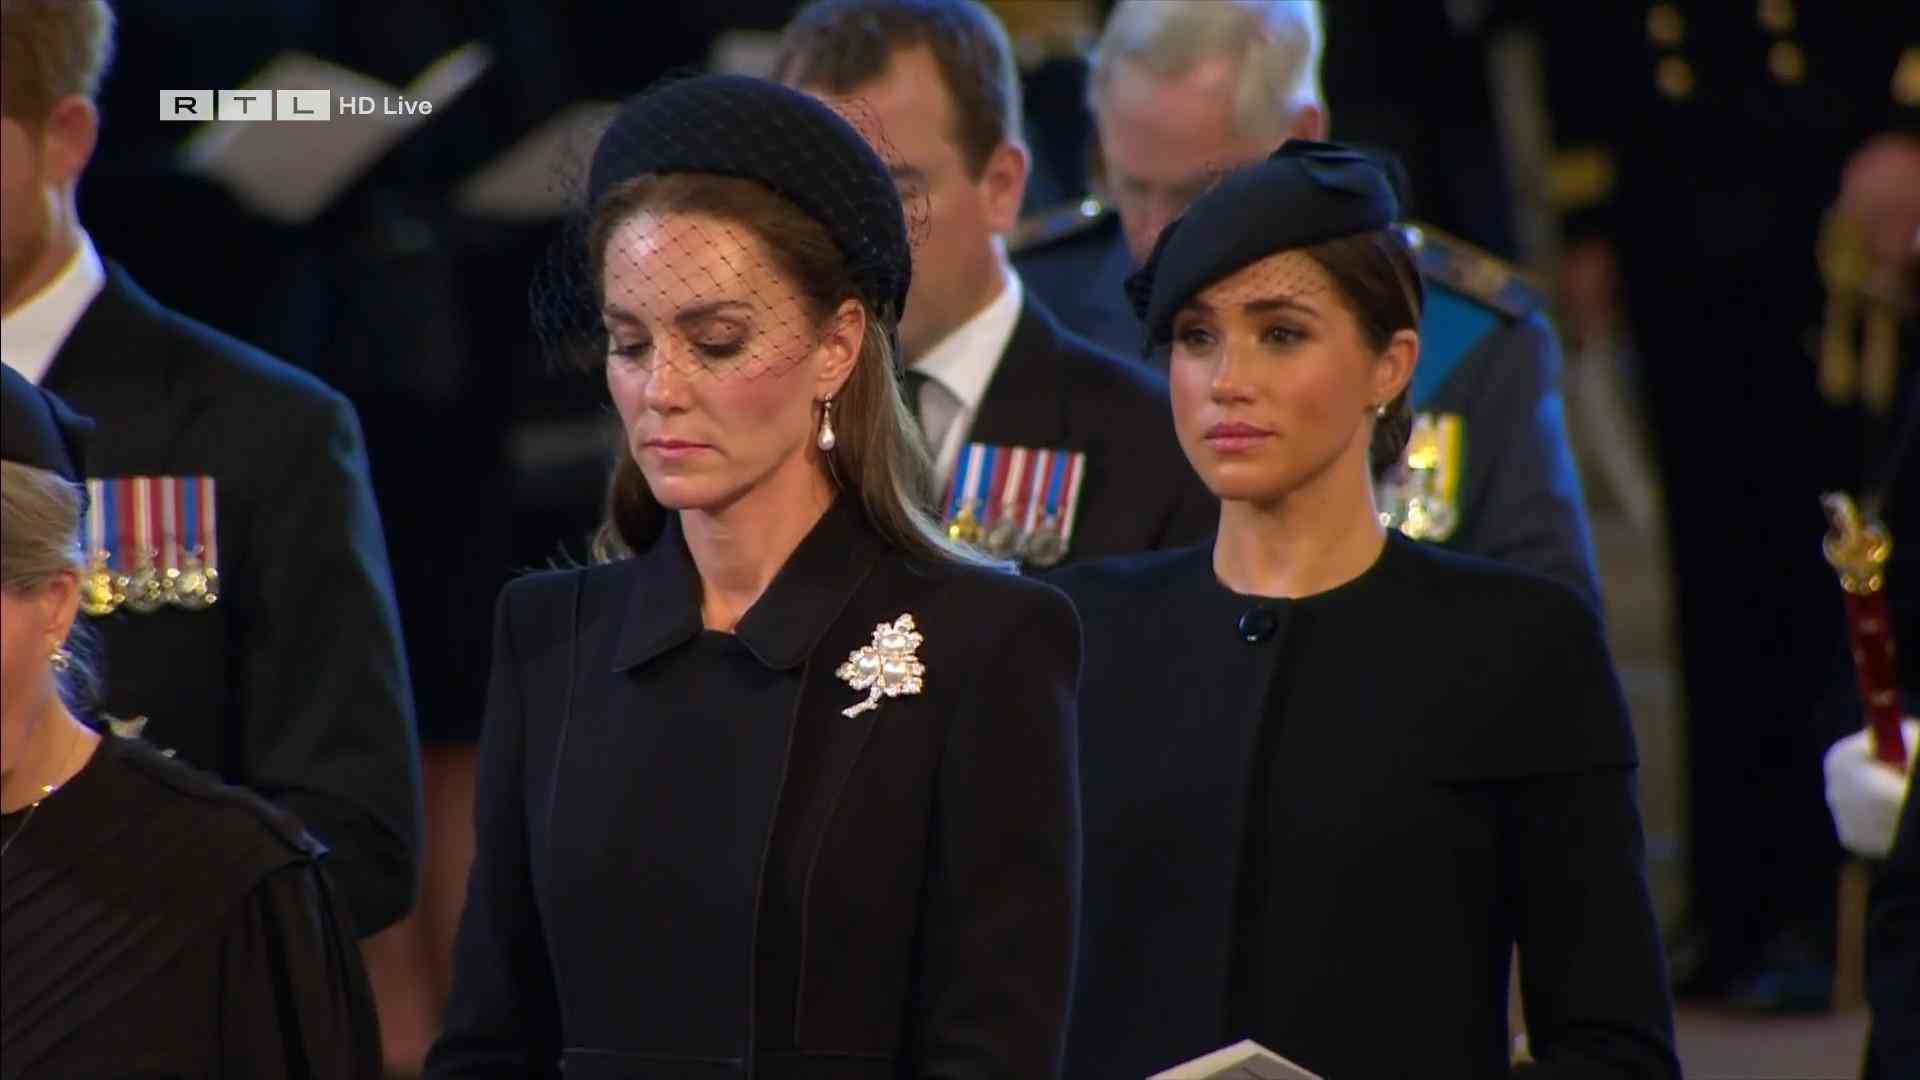 Princess Kate & Duchess Meghan unite mourning for the Queen